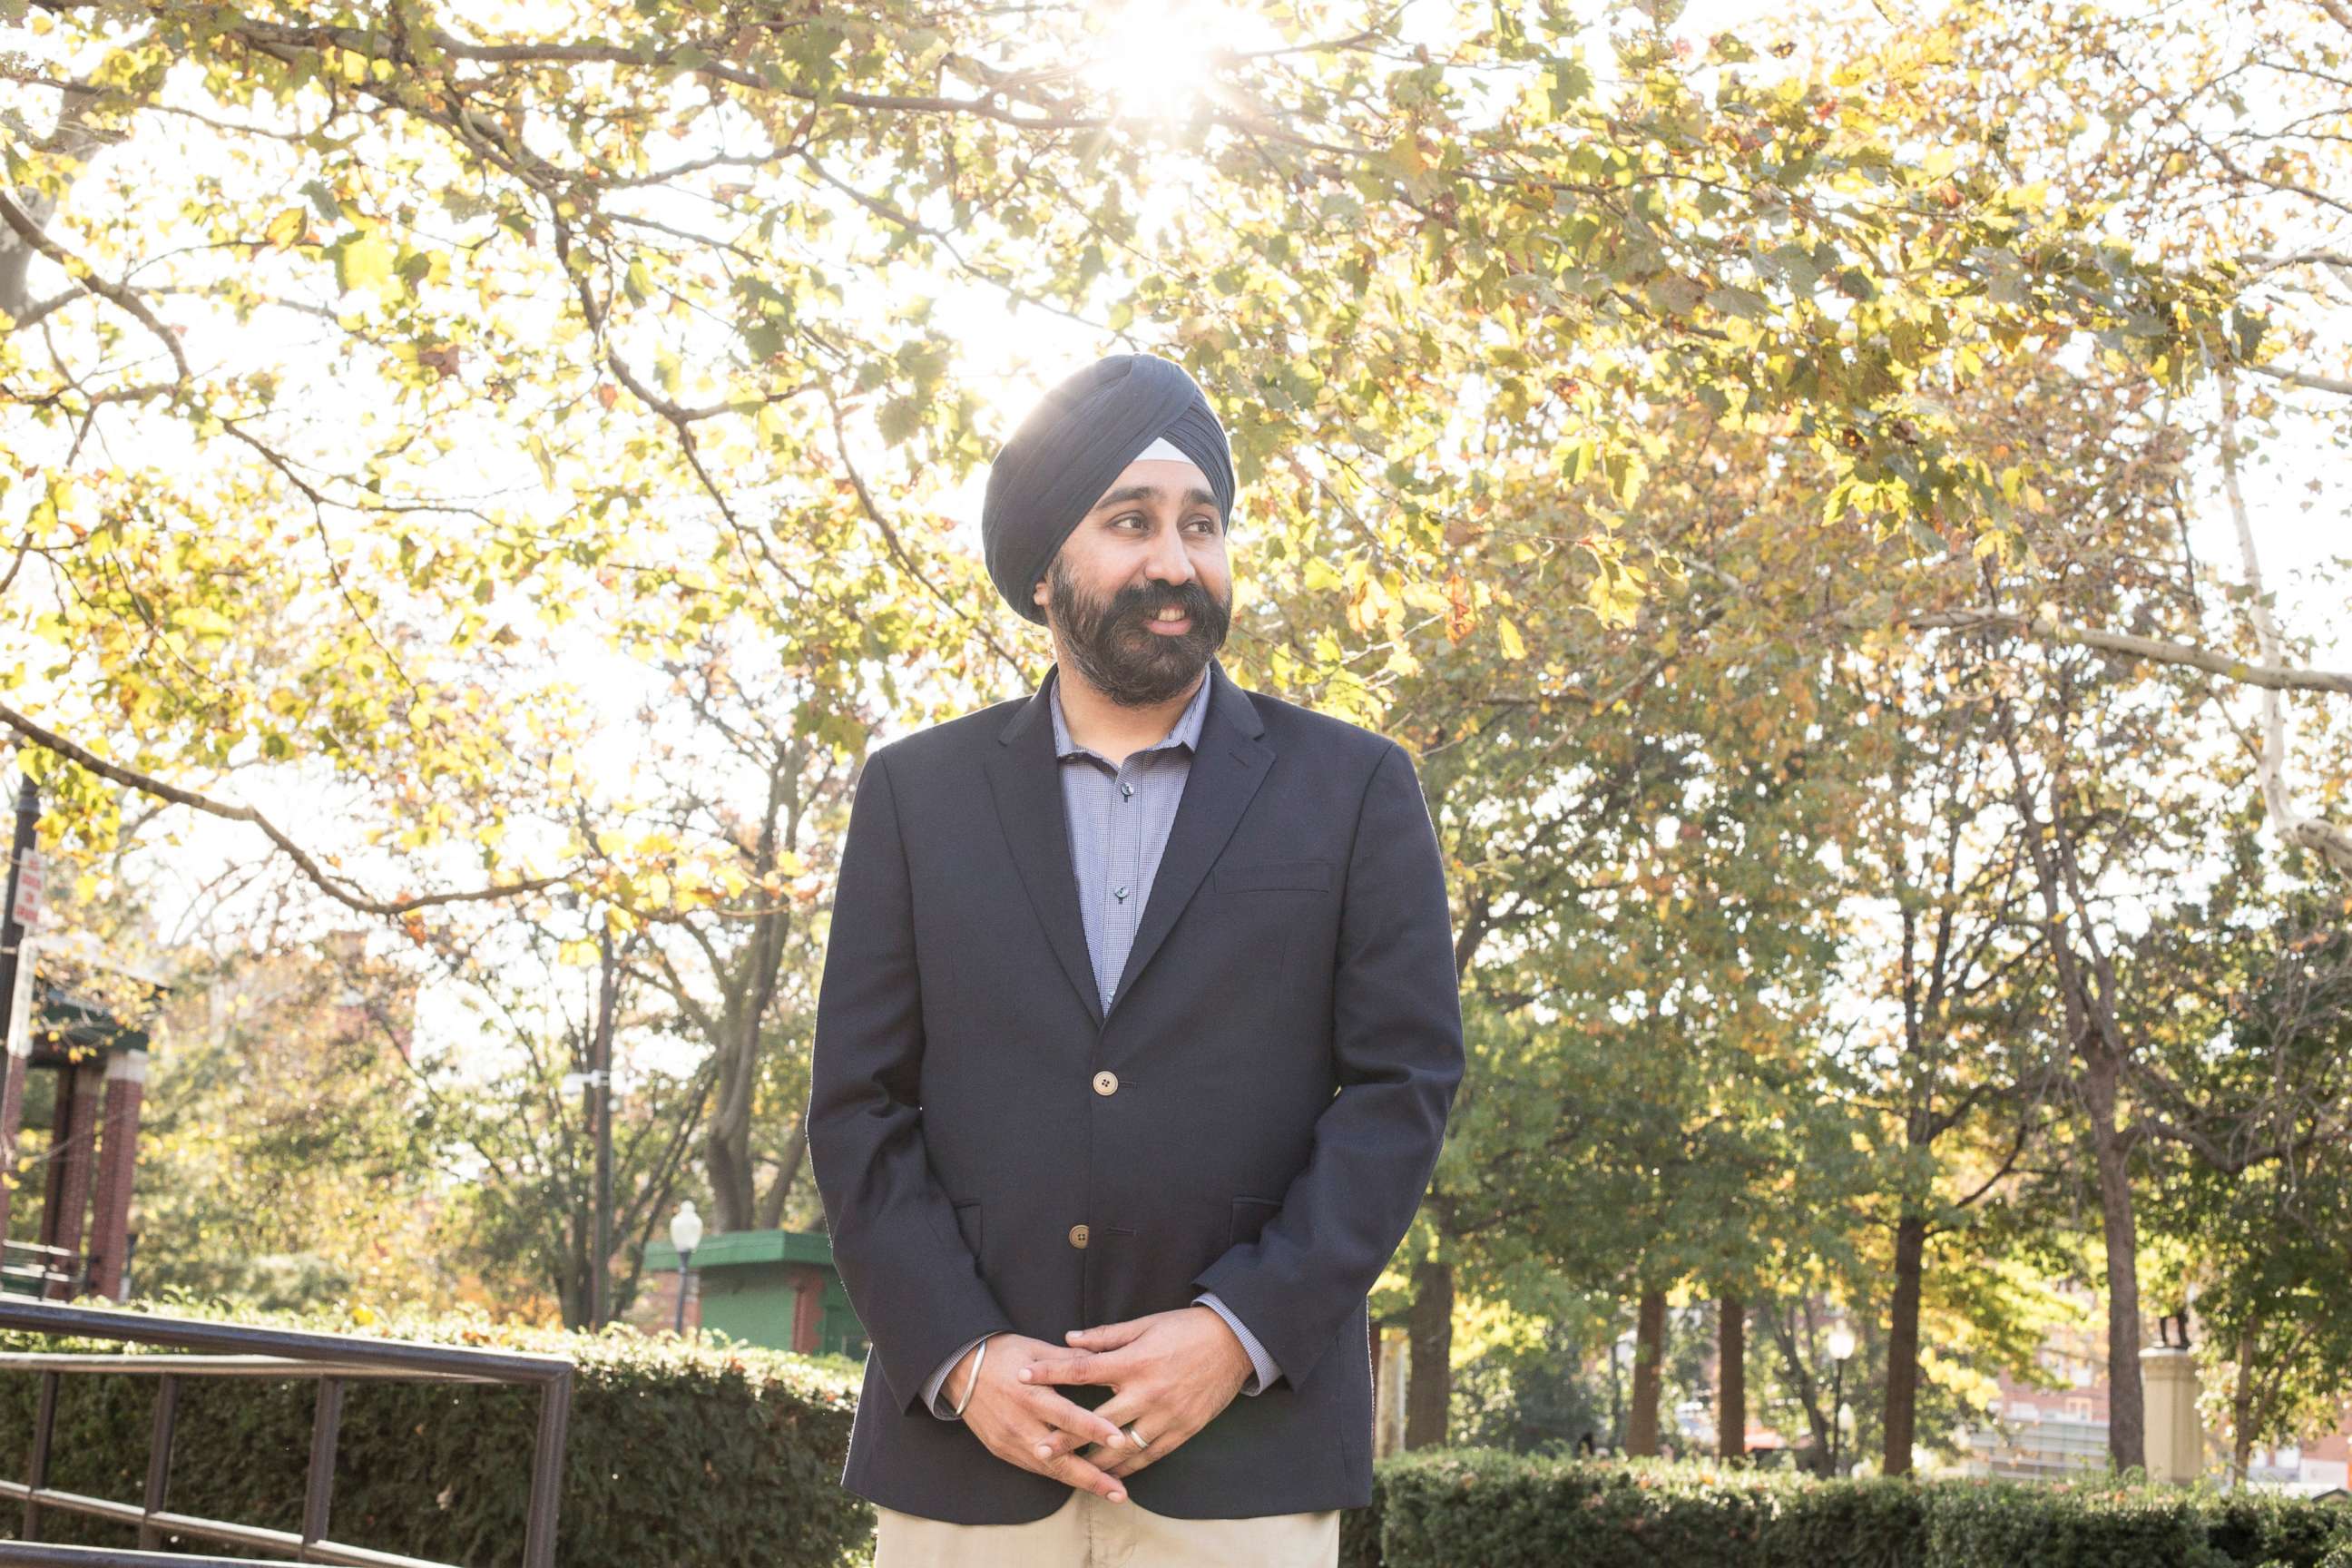 PHOTO: Ravi Bhalla, the first Sikh elected mayor in New Jersey, and one of only a few Sikhs to become mayor nationwide, in Hoboken, N.J., Nov. 8, 2017.